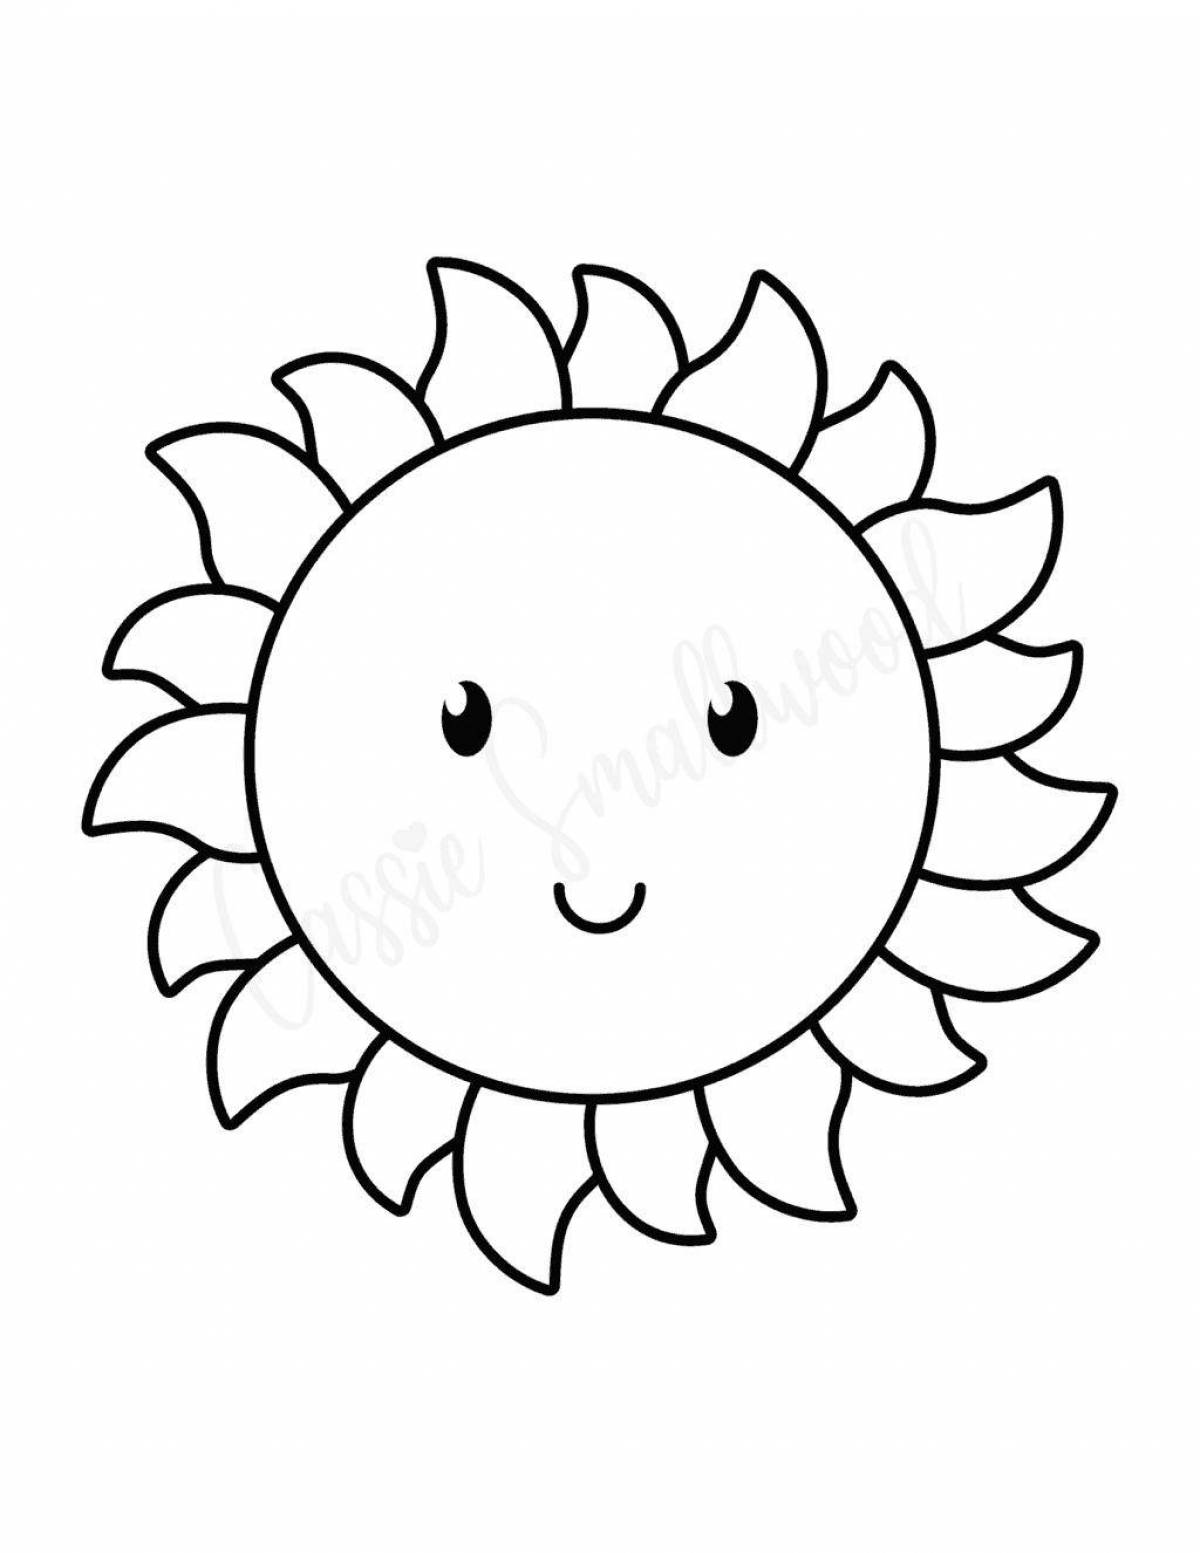 Great sun coloring book for 4-5 year olds